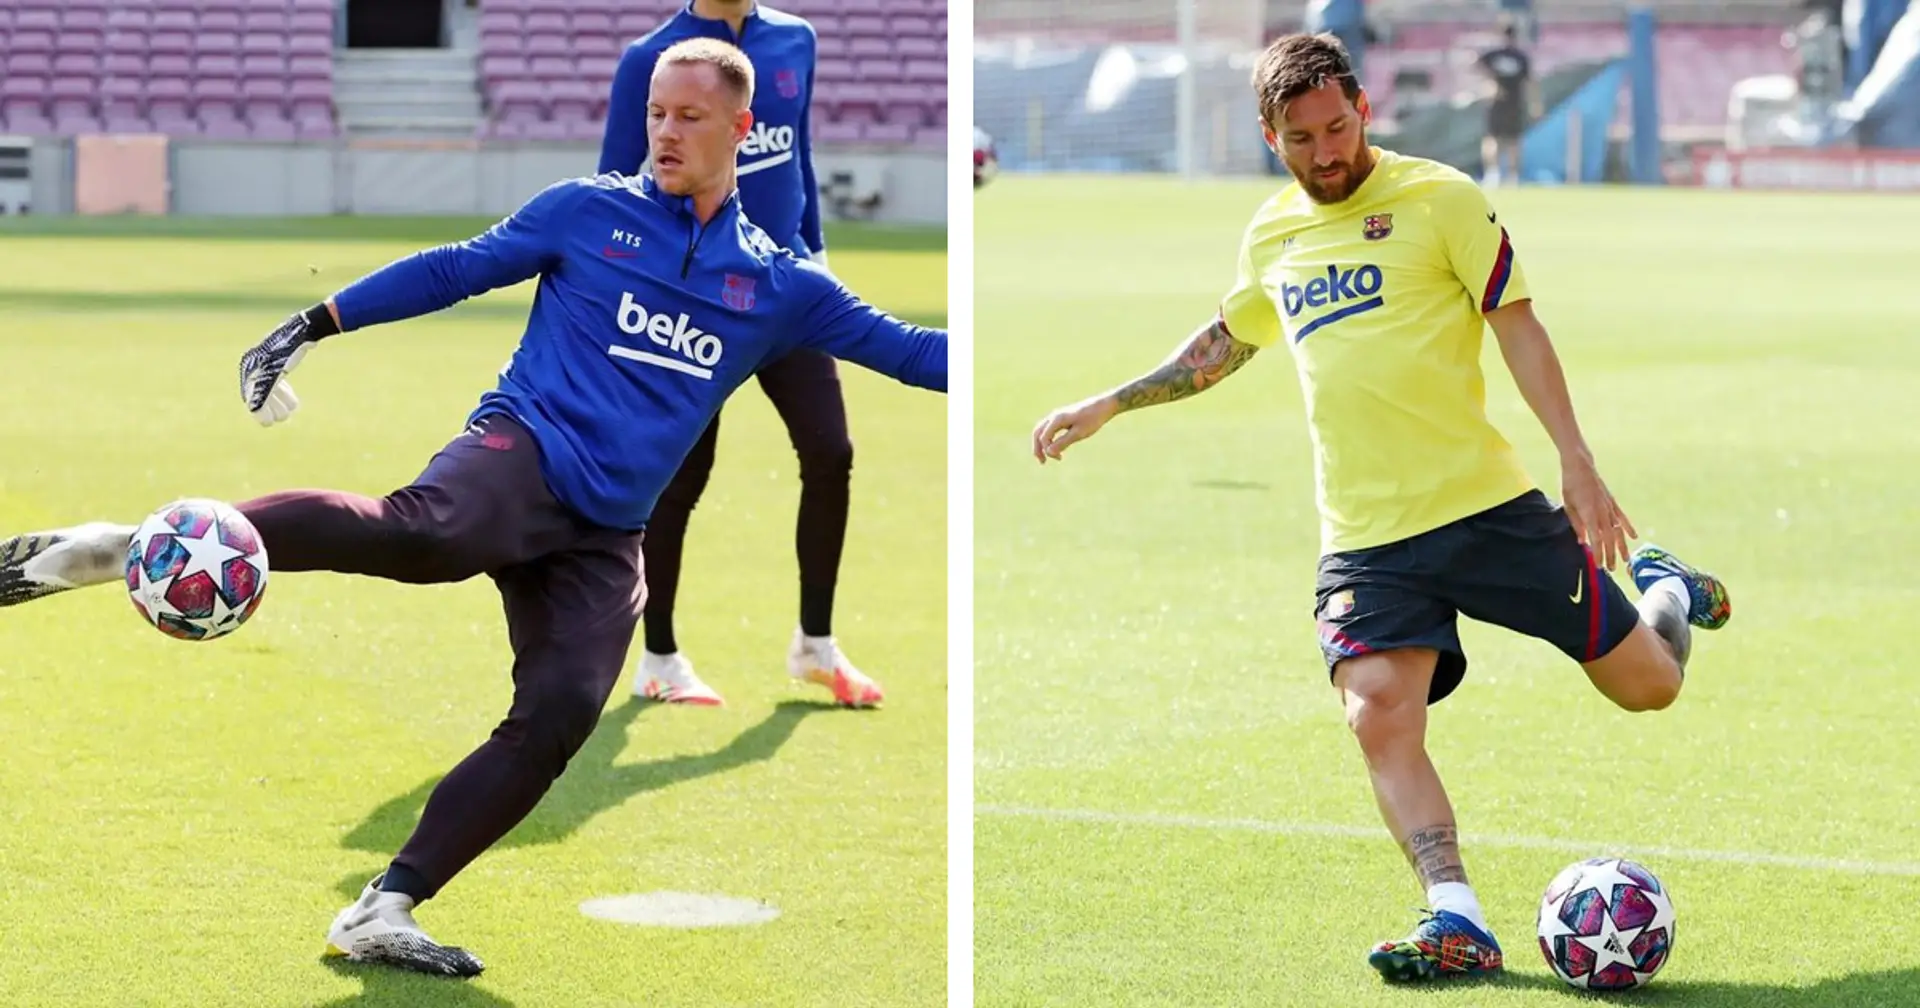 Preparation for Napoli continue as Barca hold intersquad friendly in Sunday training